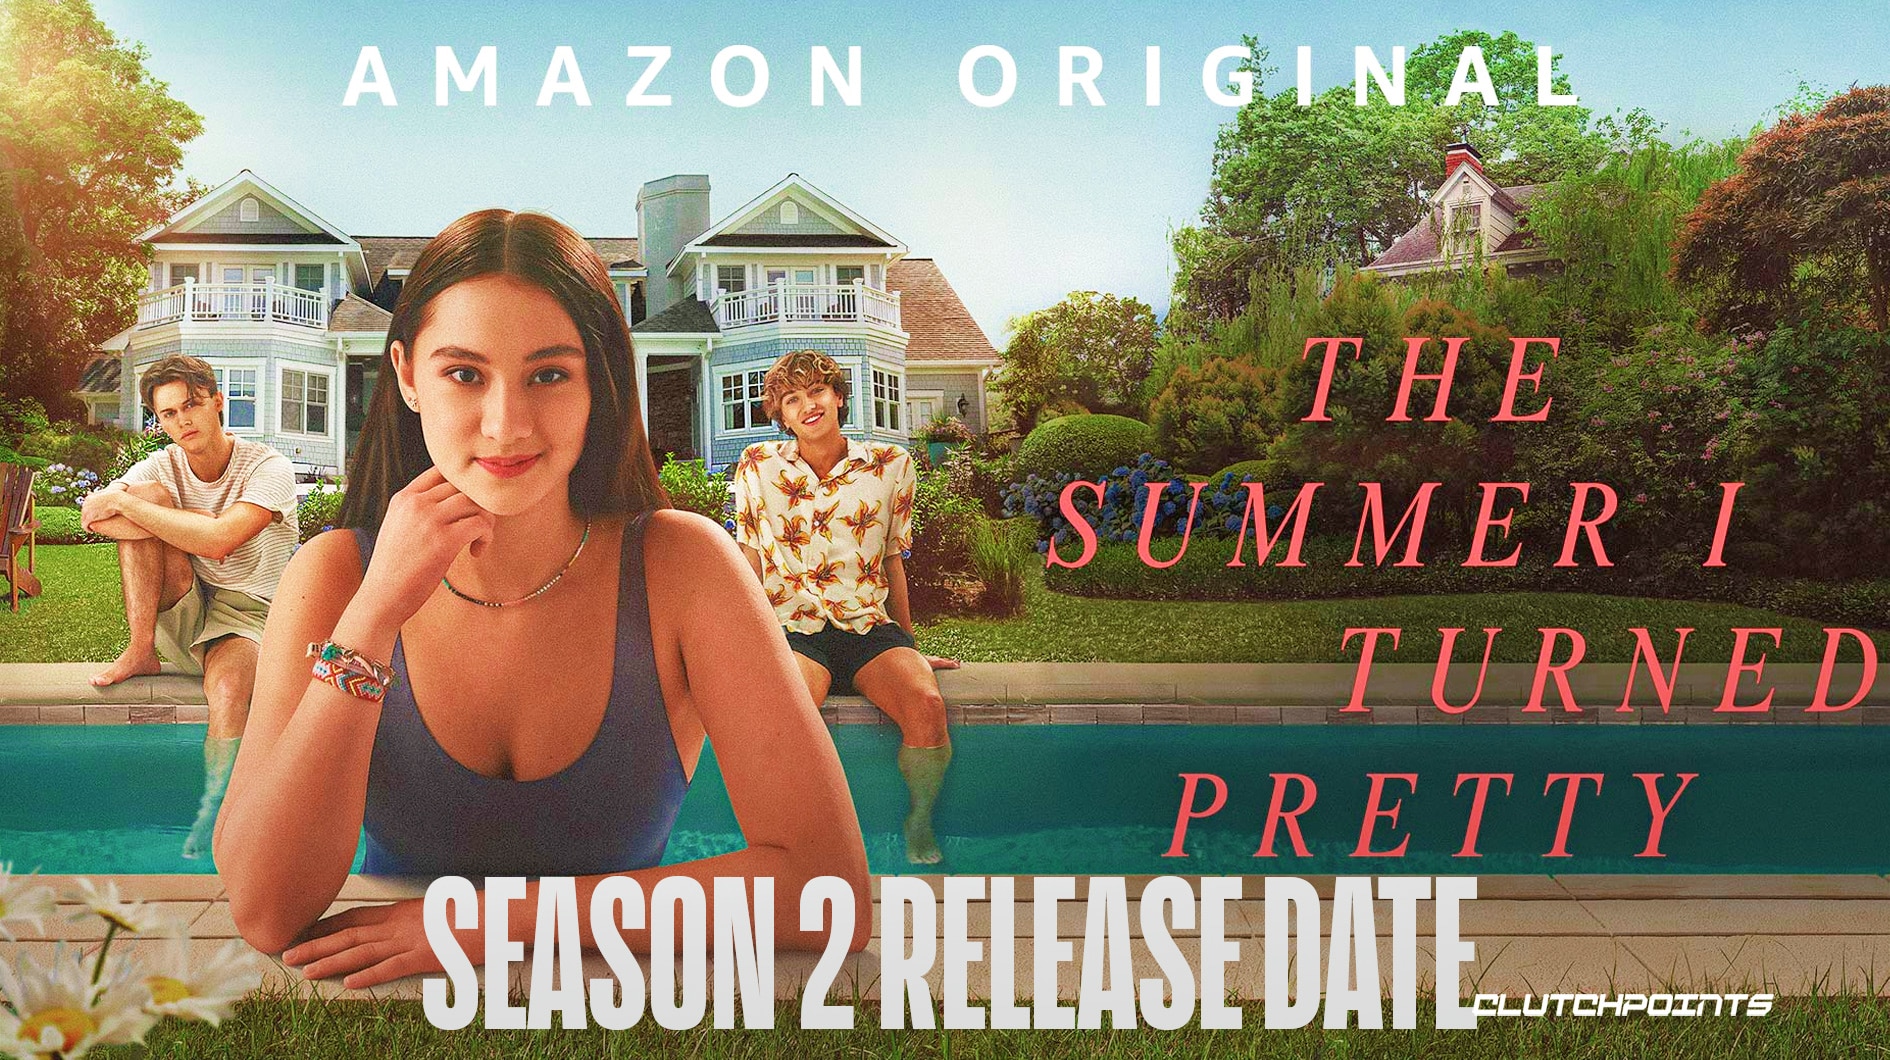 The Summer I Turned Pretty Season 2 - Official Trailer